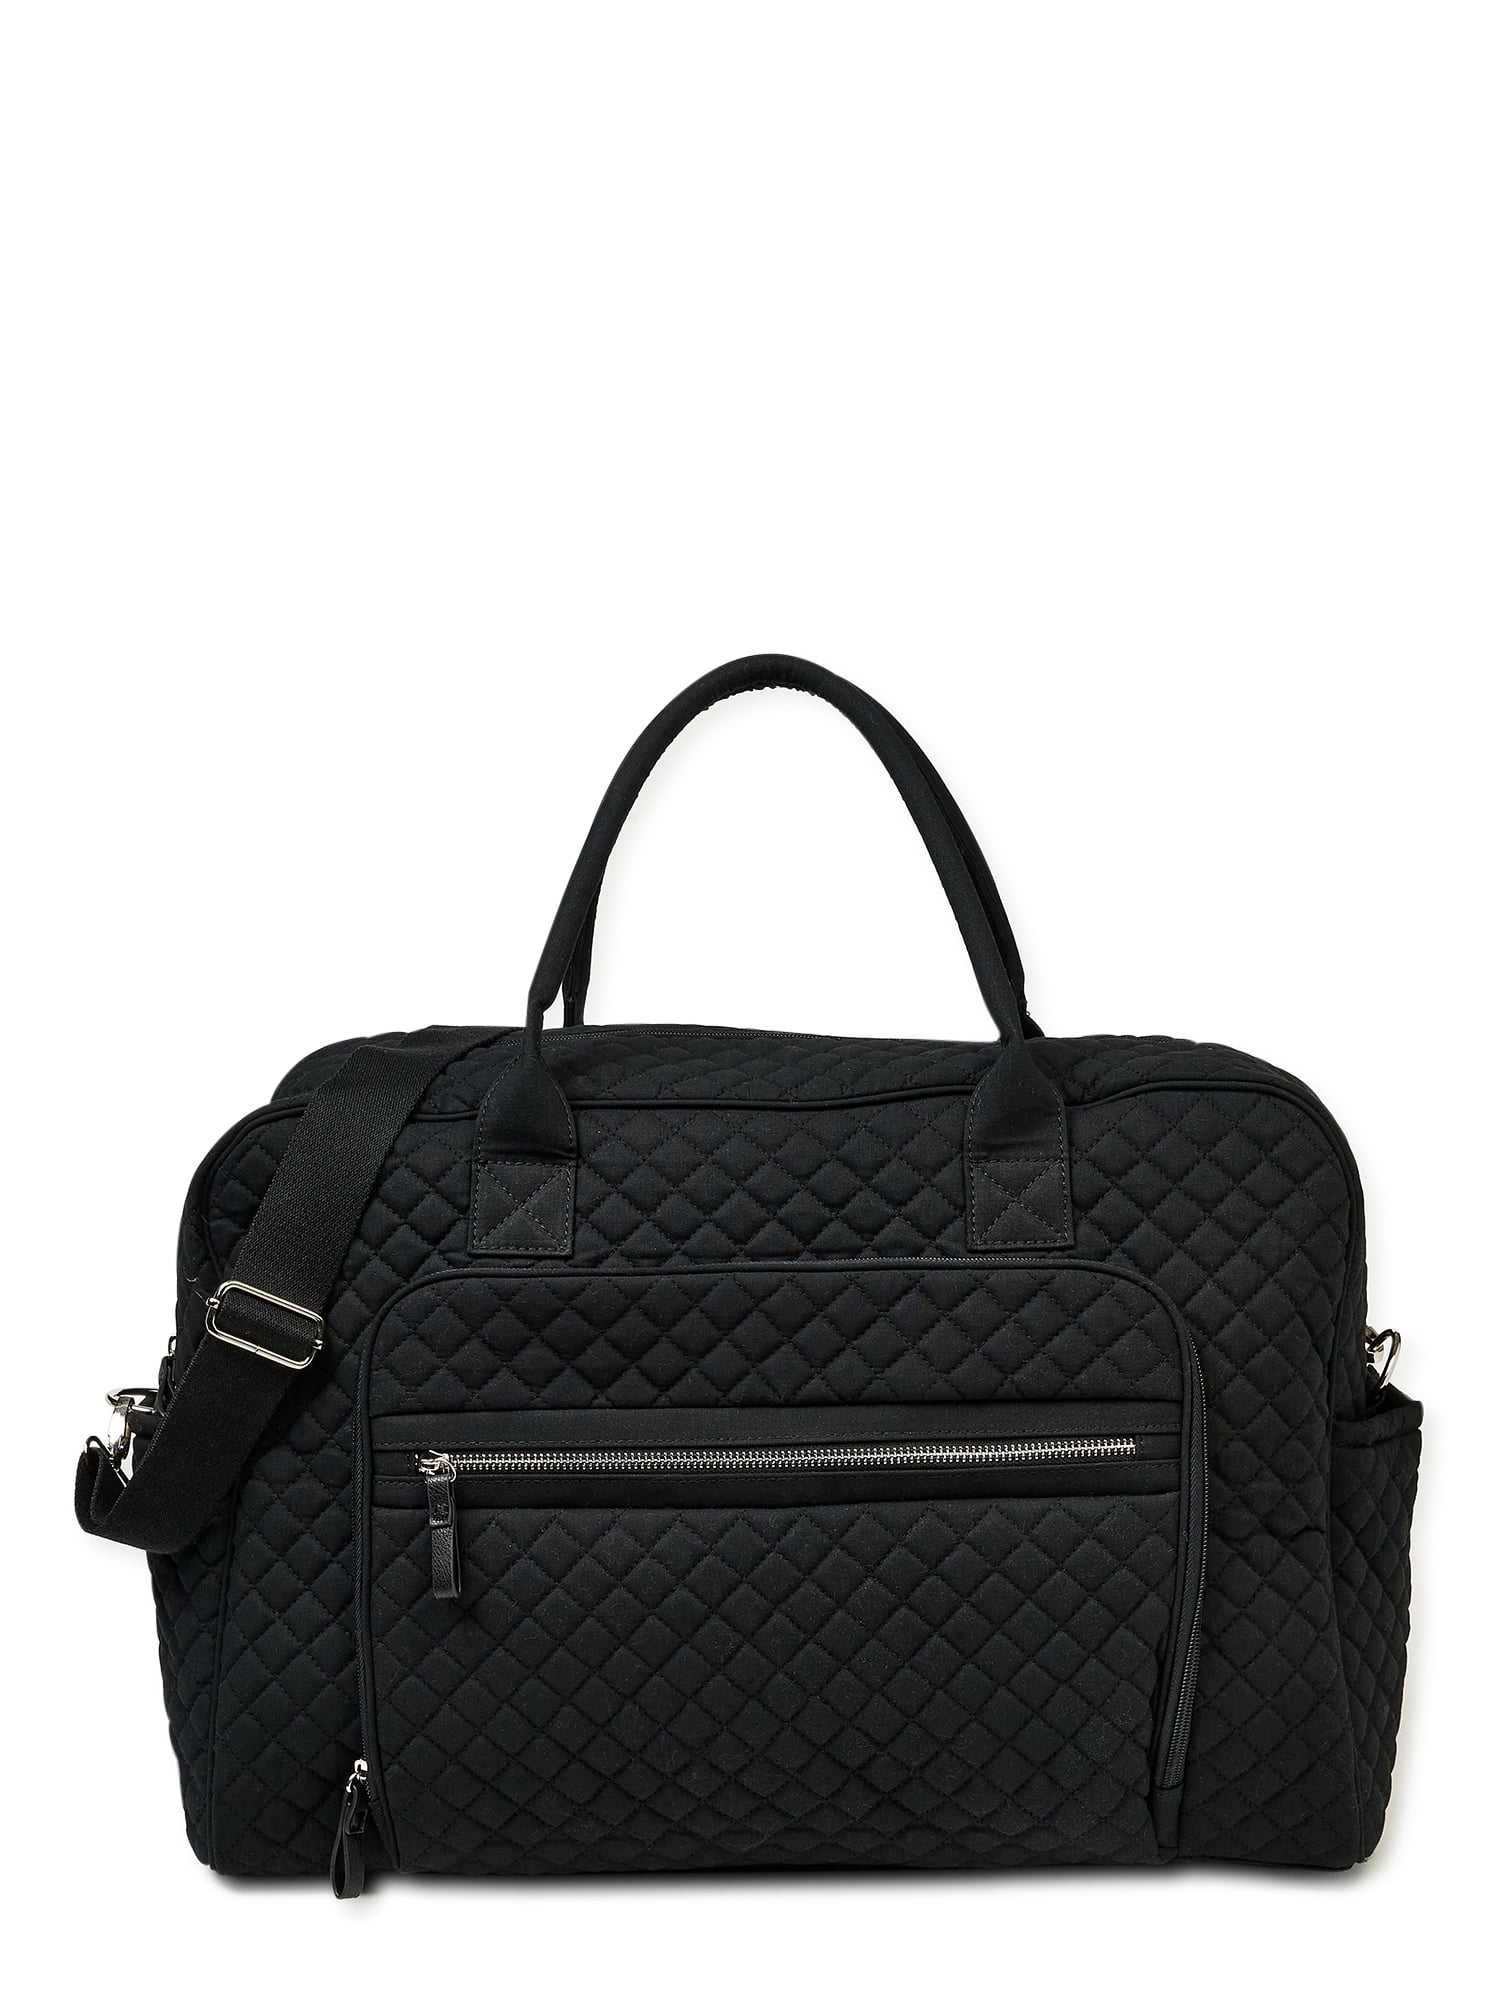 No Boundaries Women's Quilted Weekender Duffle Bag with Multi